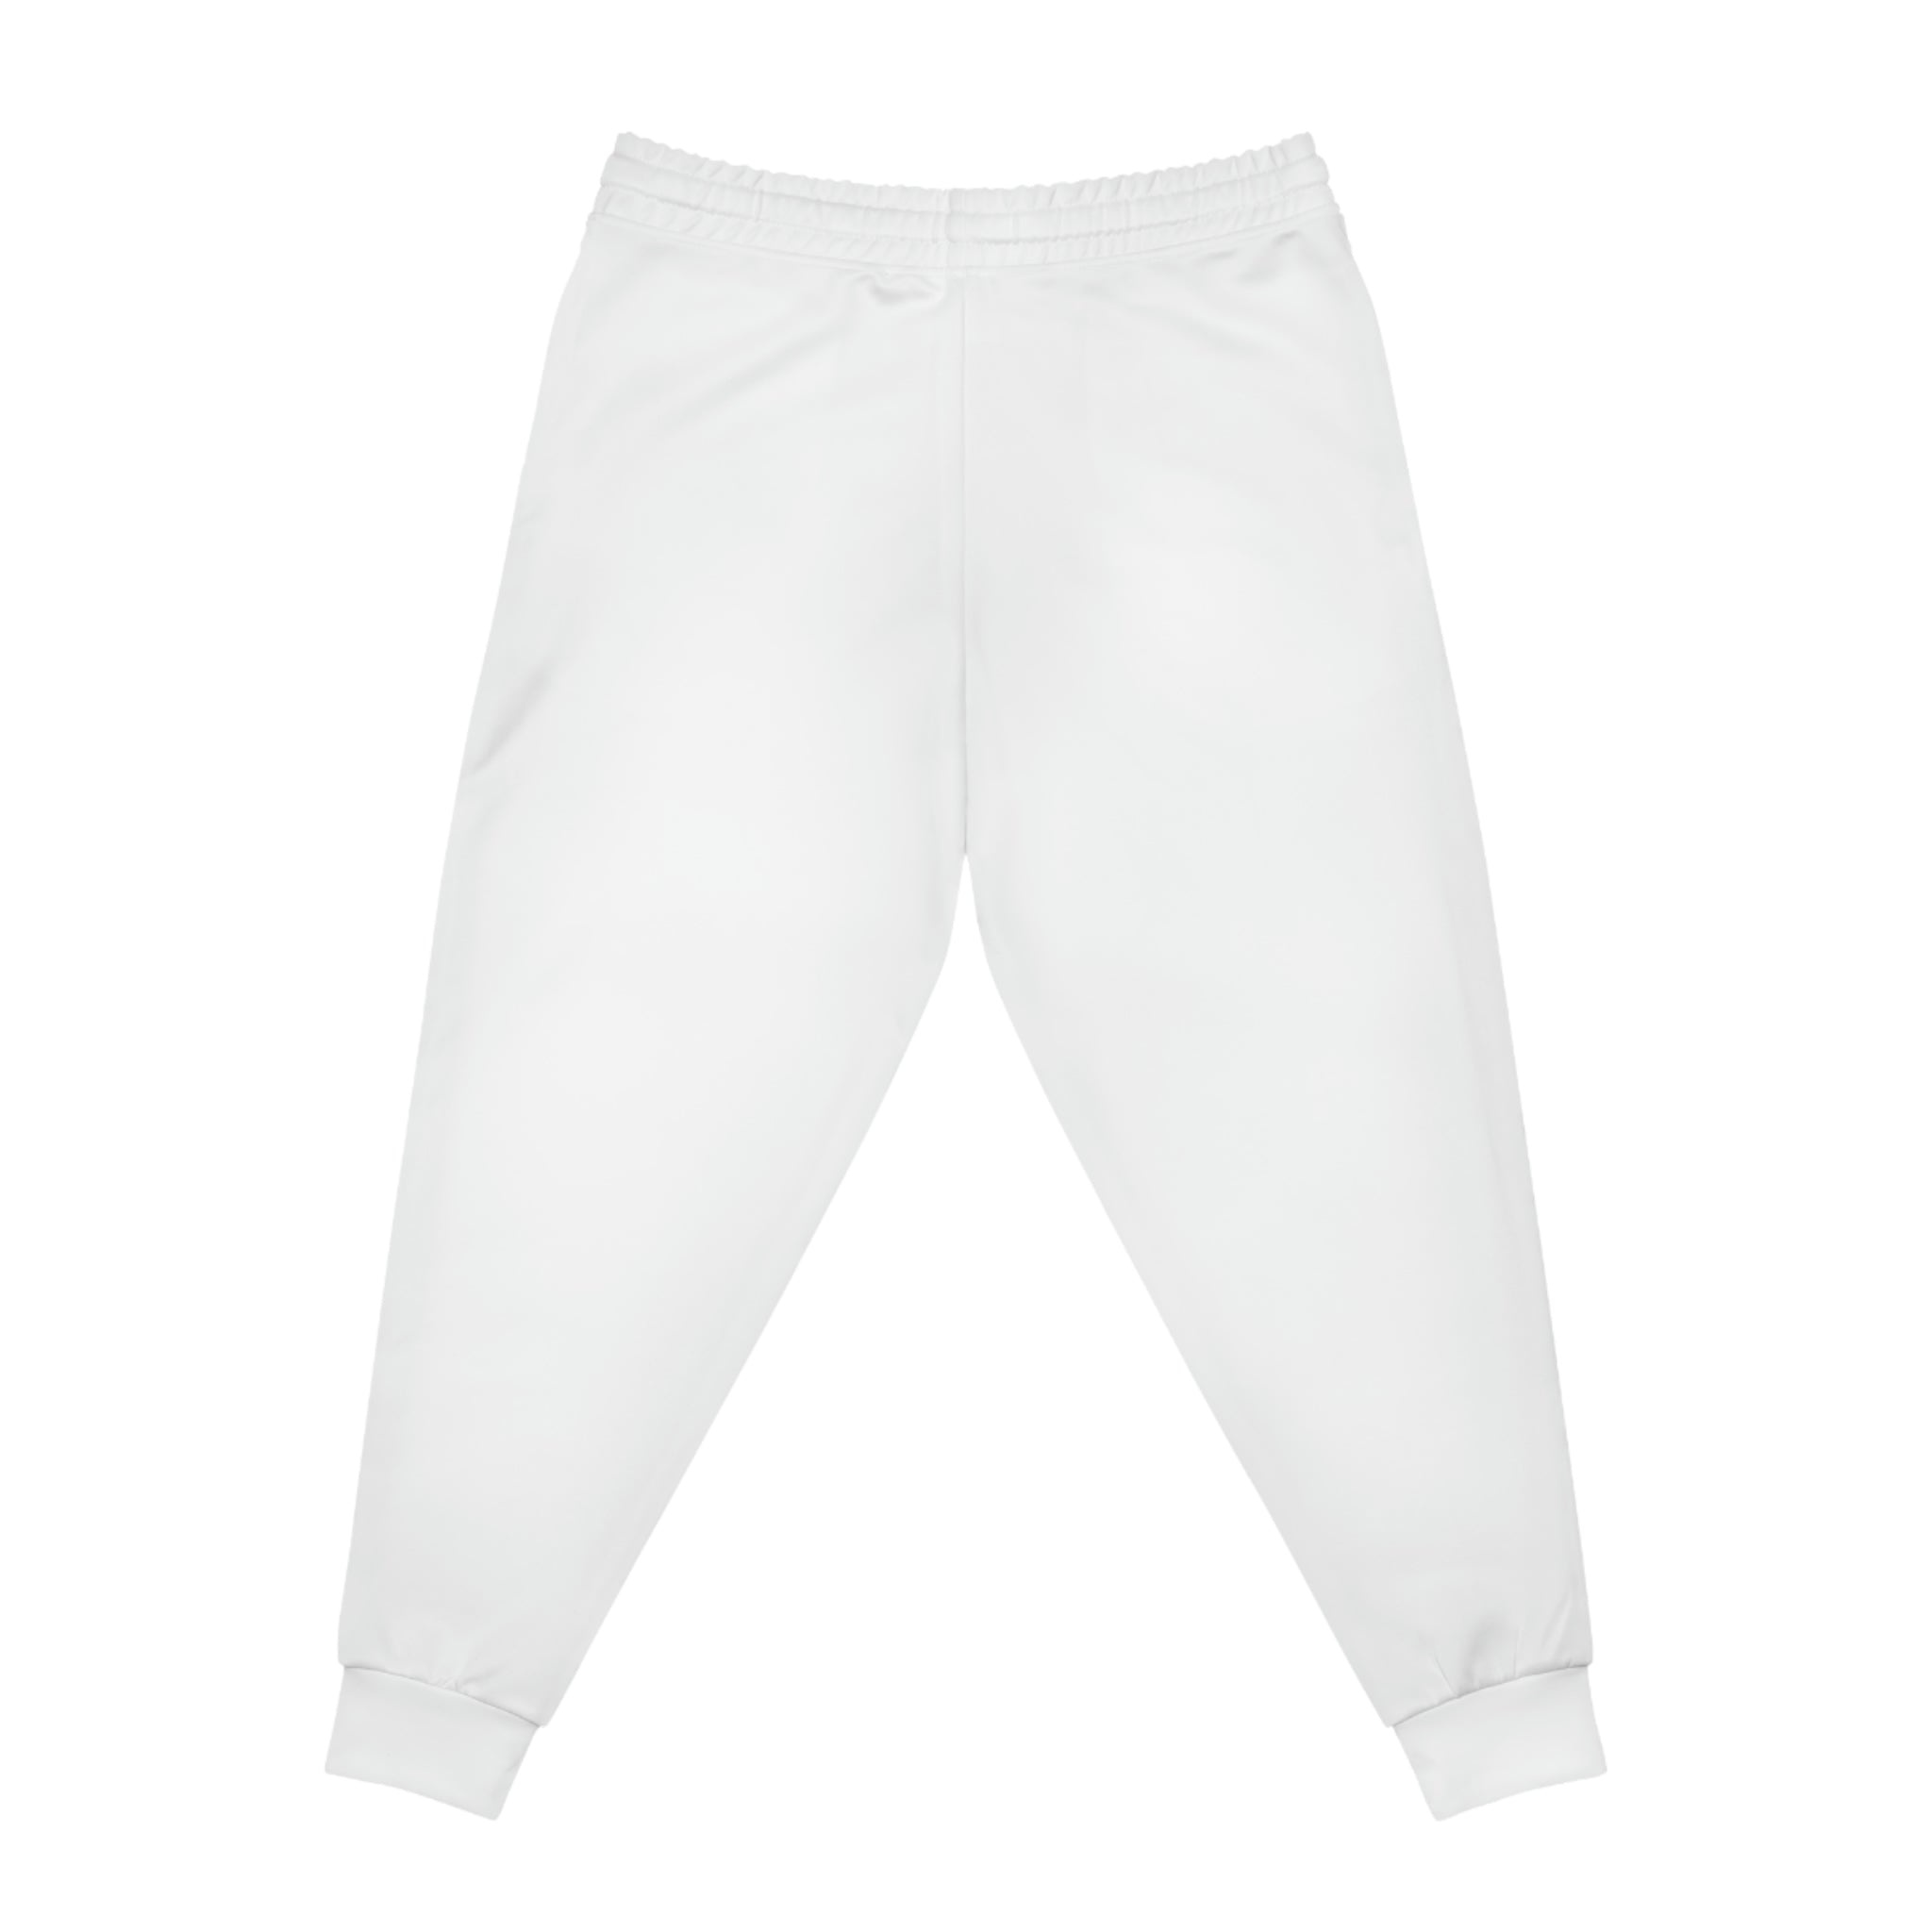 Identity Collection Sweatpants White